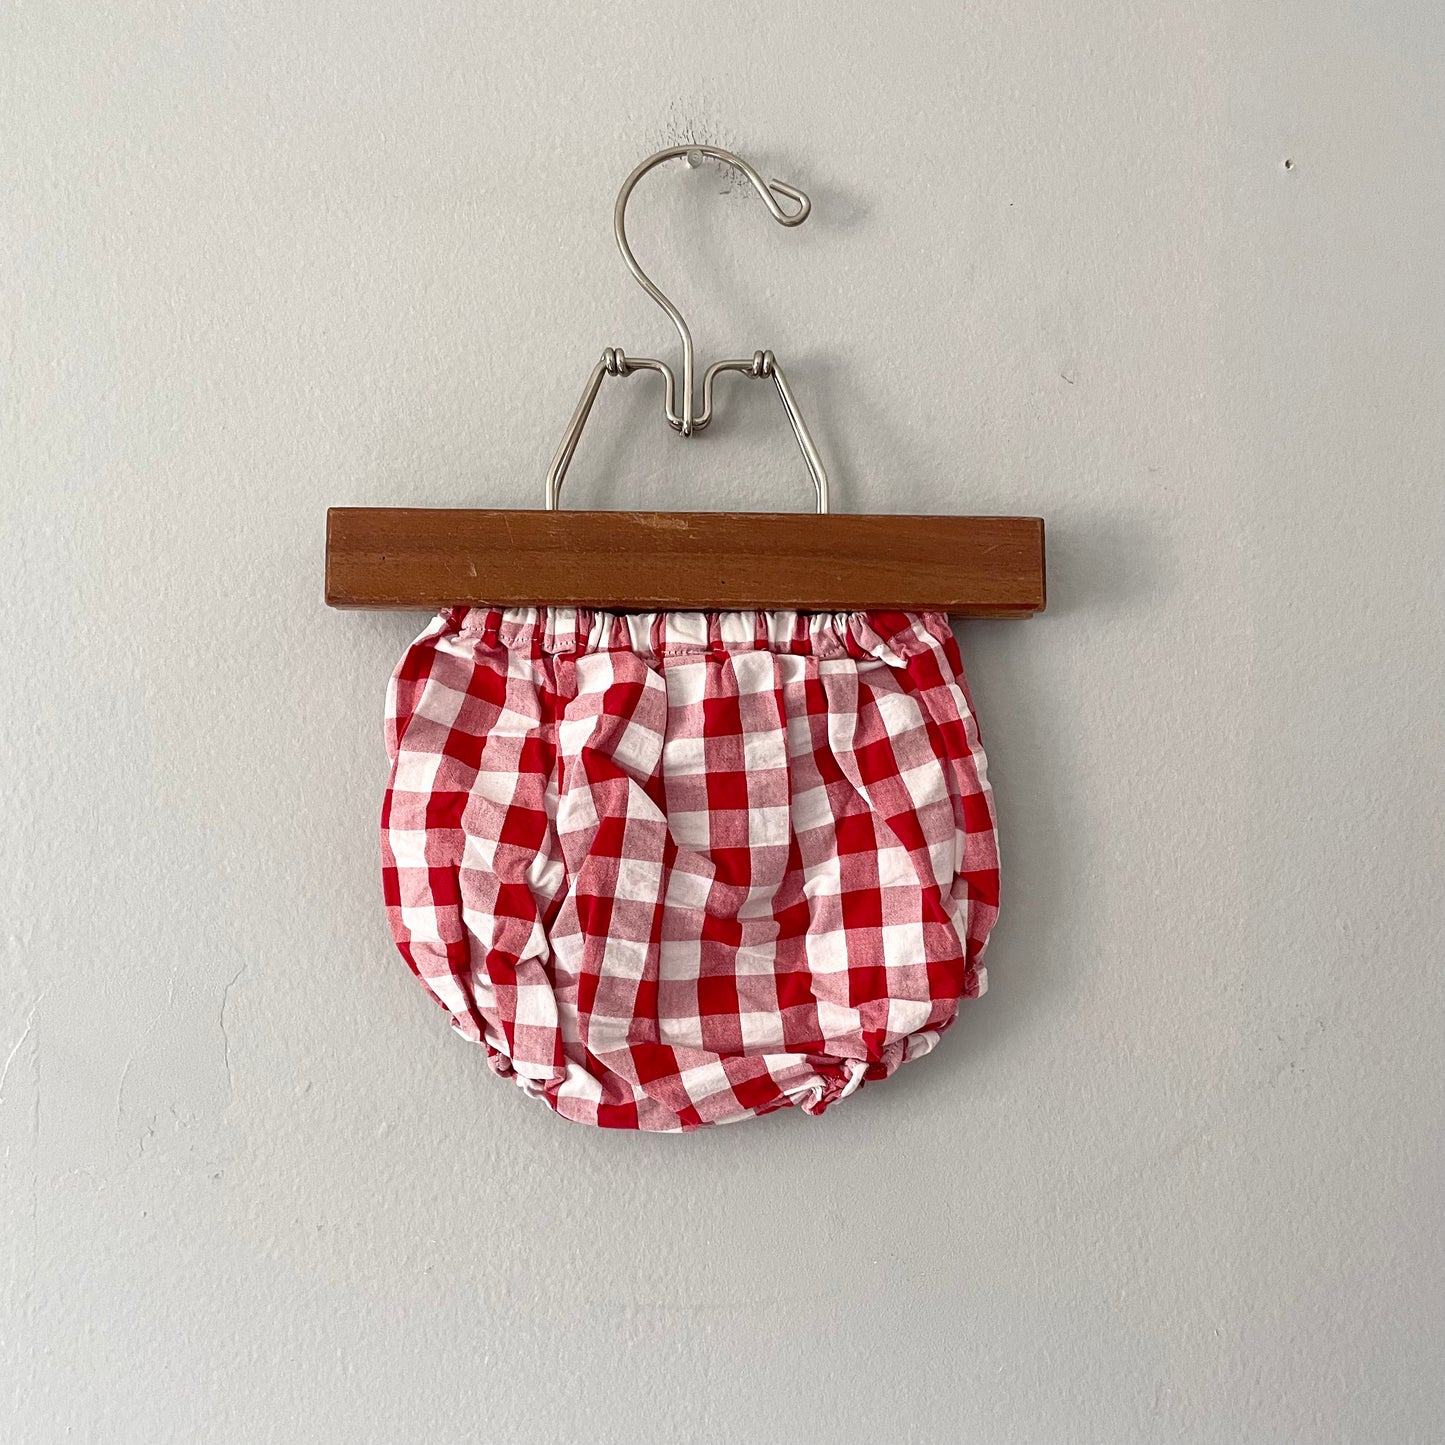 Chateau de sable / Gingham check bloomer / 3M